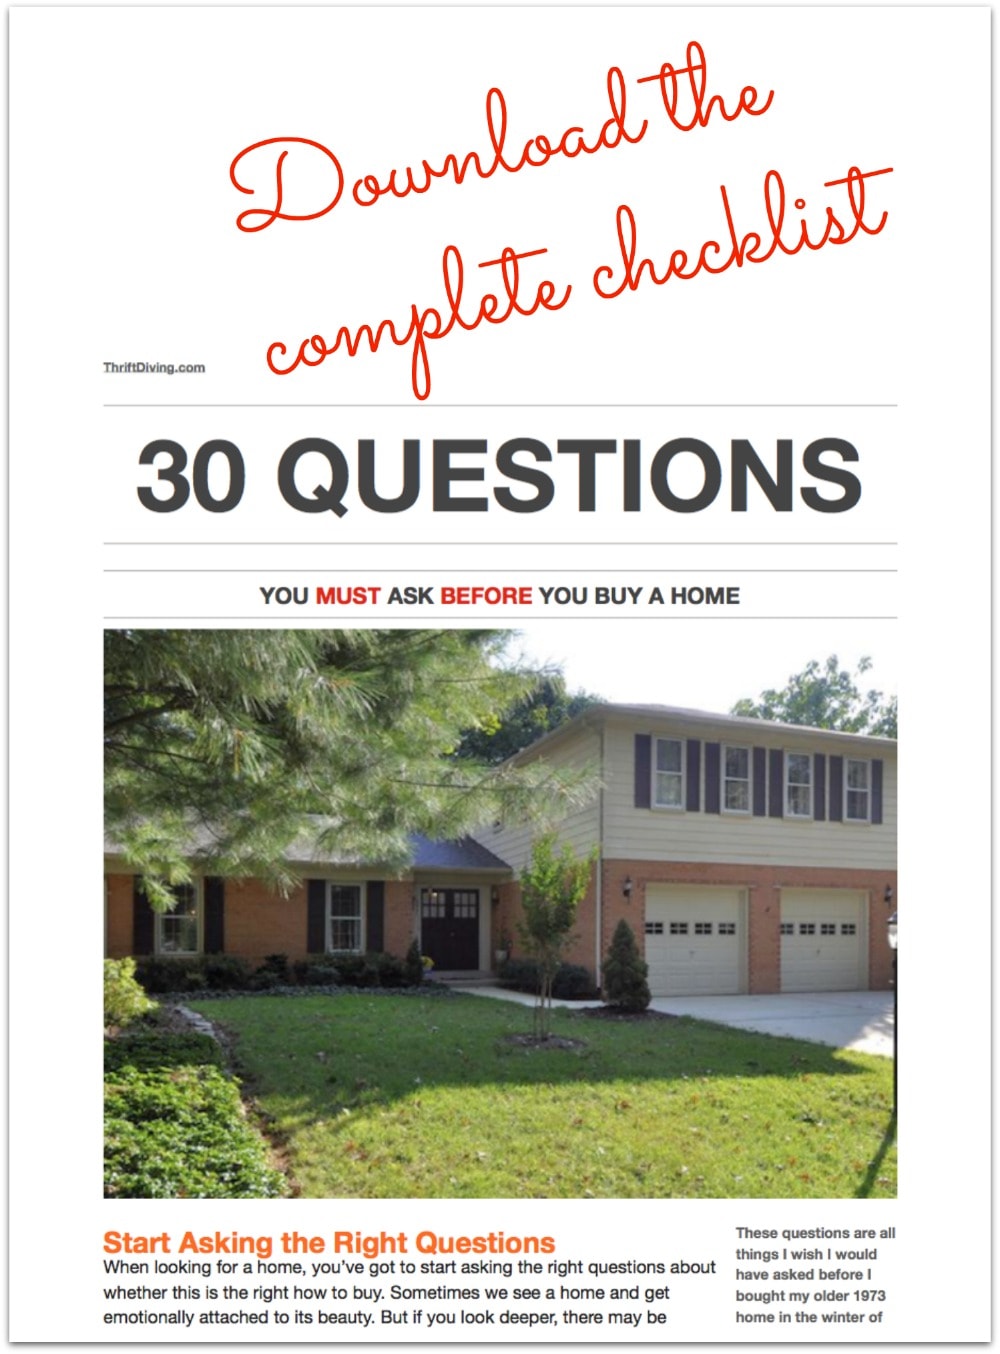 30 Questions You Must Ask Before Buying a Home - Download the free complete checklist2 - ThriftDiving.com.jpg